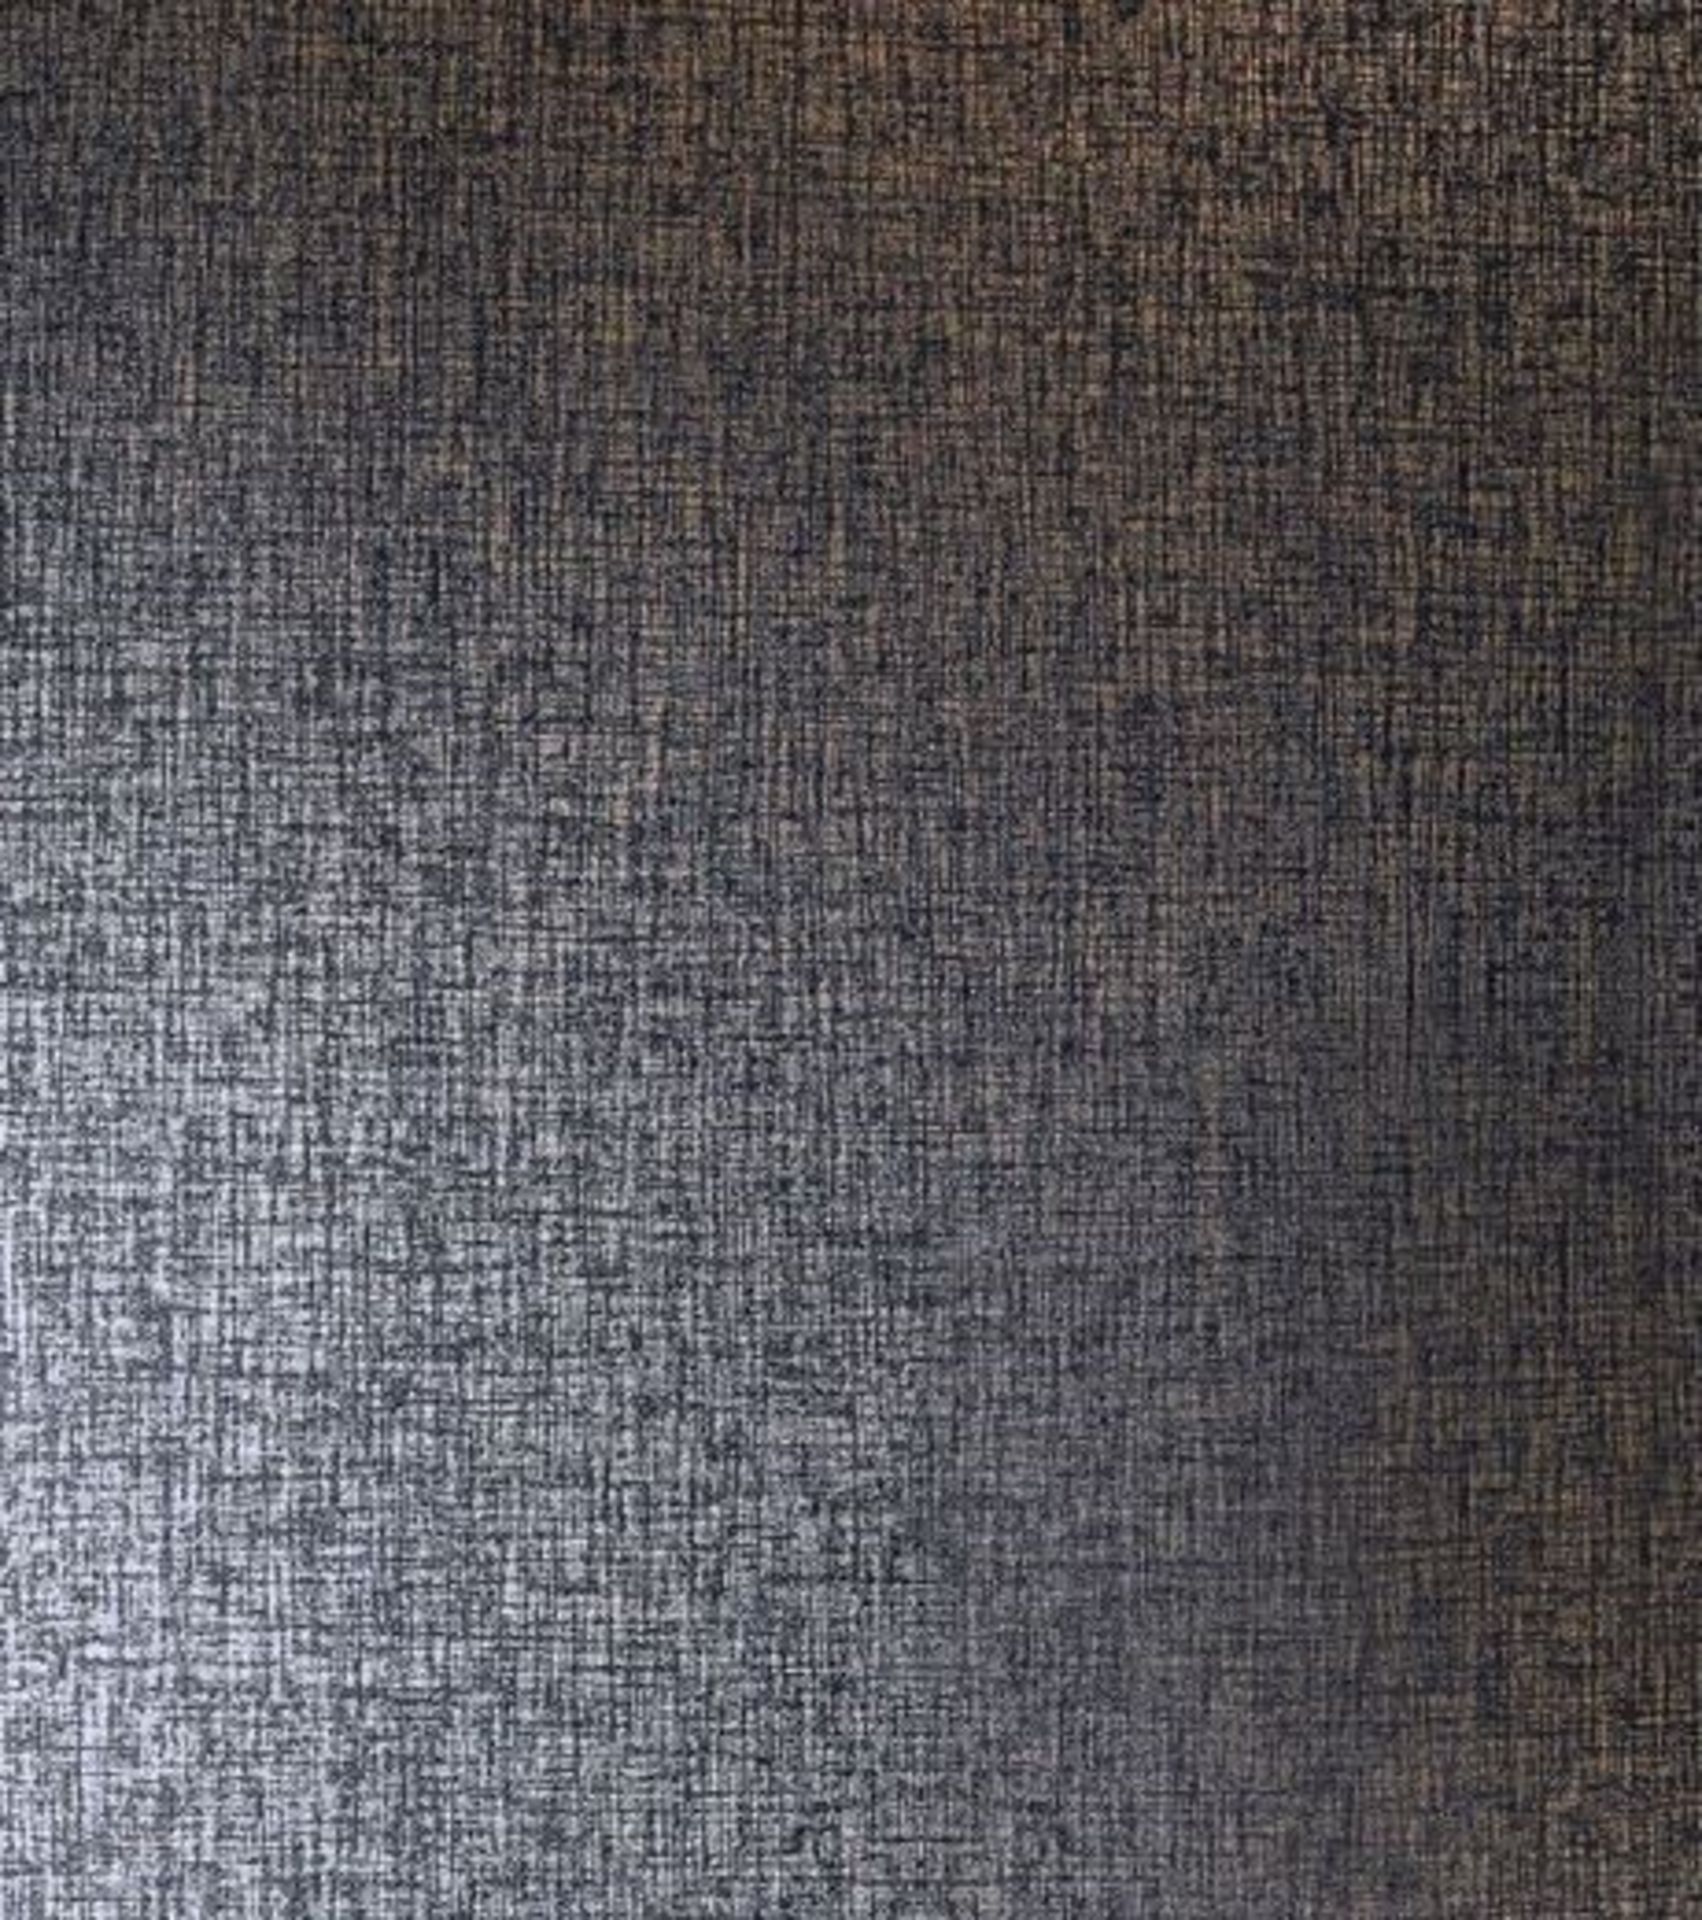 1 LOT TO CONTAIN 12 AS NEW ROLLS OF ARTHOUSE KASHMIR TEXTURE WALLPAPER IN NAVY GOLD - 910304 /